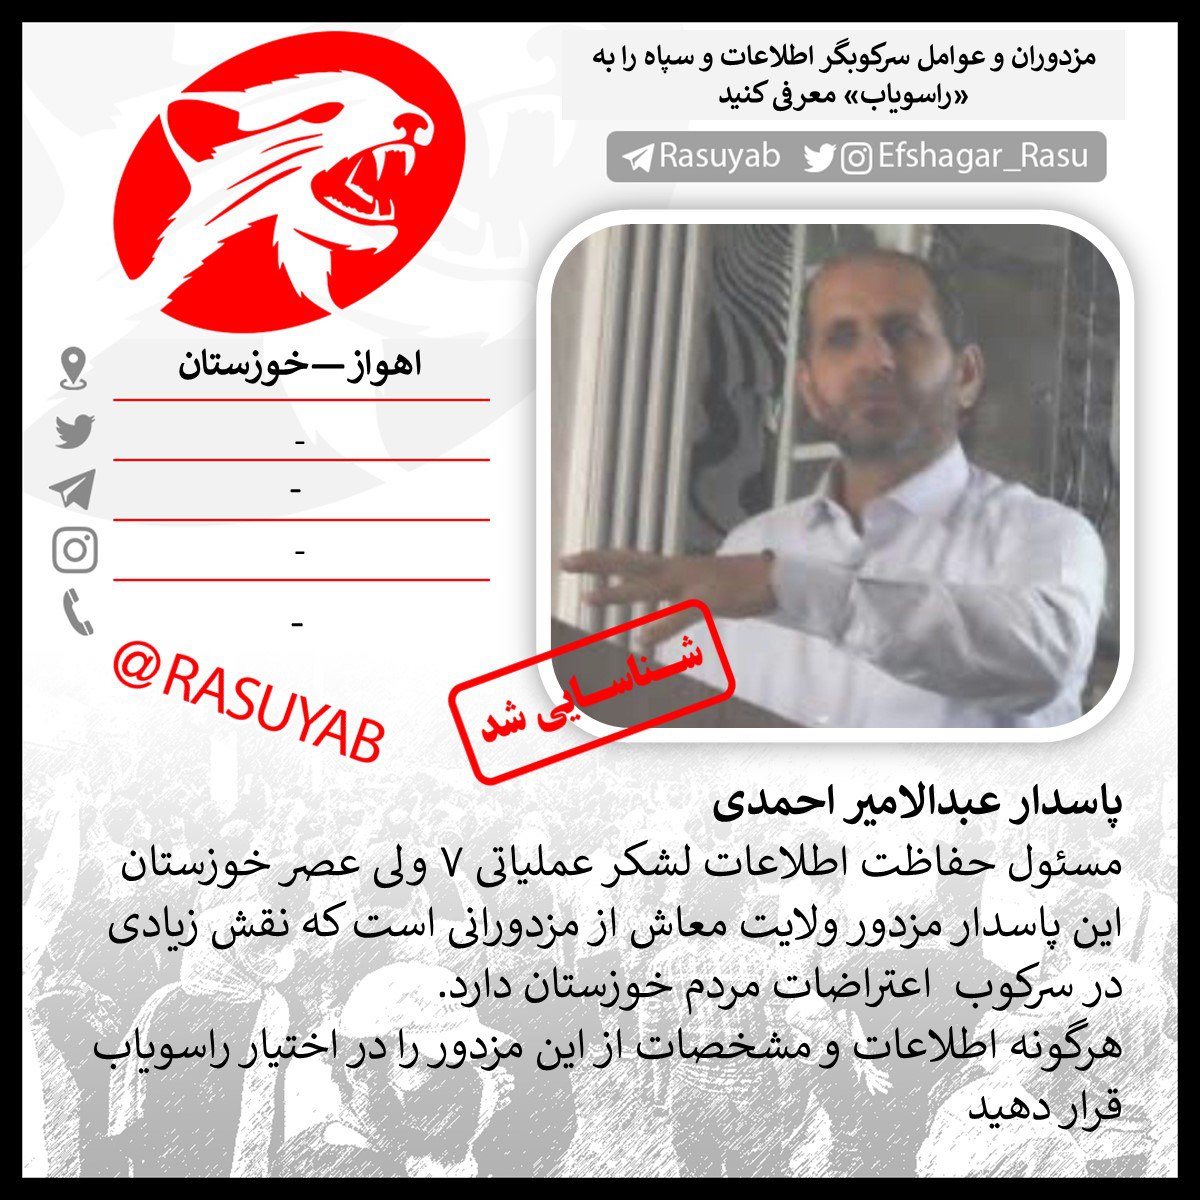 ‼️Pasdar Abdul Amir Ahmadi #اهواز #خوزستان
Information protection officer of the 7th operational division of Vali Asr Khuzestan
This mercenary guard is one of the mercenaries who plays a big role in suppressing the protests of the people of Khuzestan.

Provide any information and